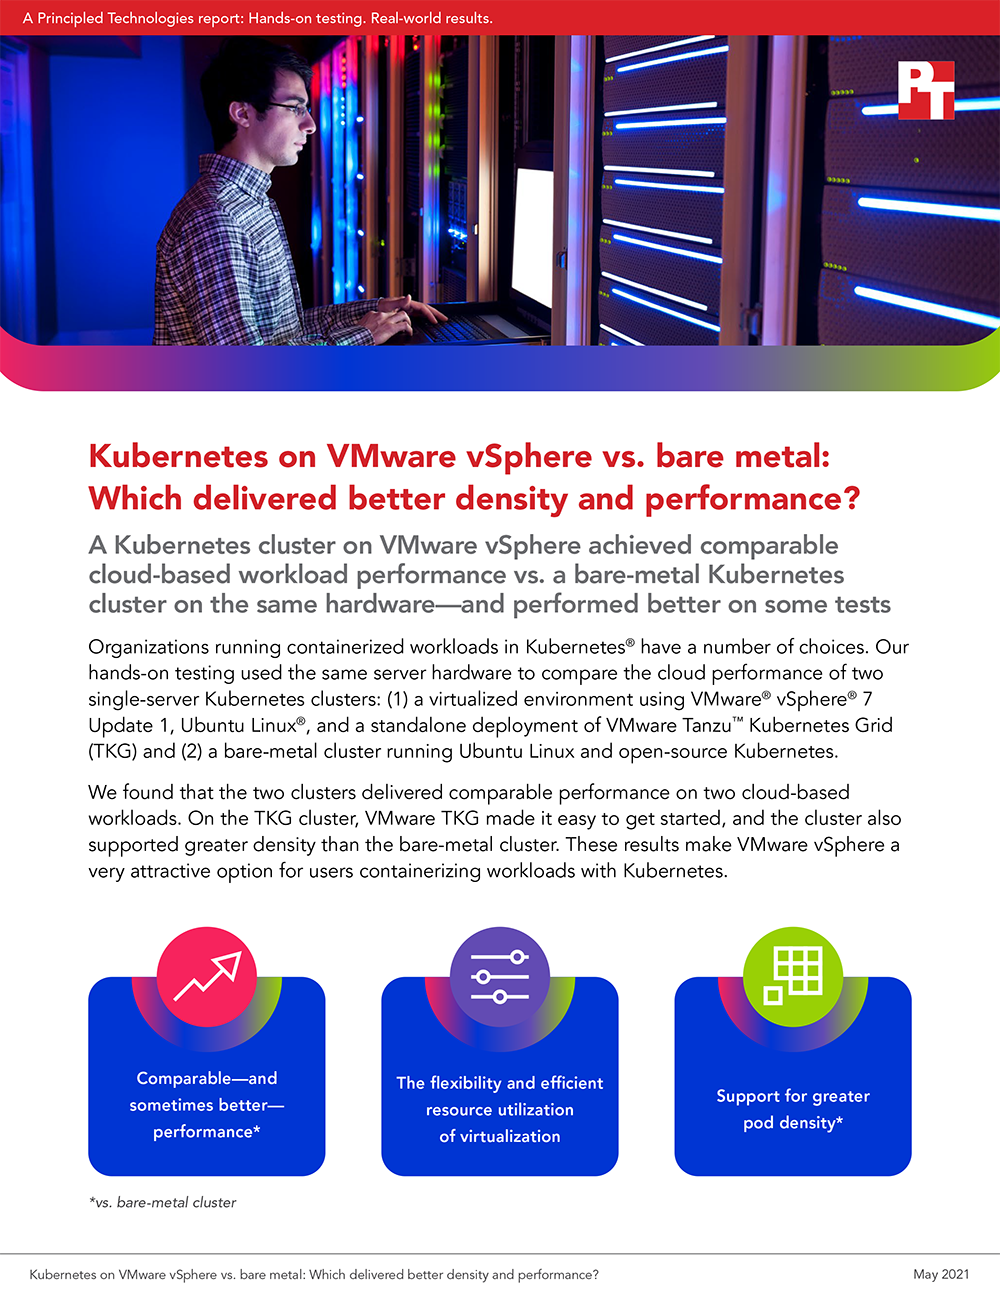 Principled Technologies Releases New Study Comparing Two Kubernetes Clusters, One Virtualized Using VMware vSphere with Tanzu Kubernetes Grid and the Other Bare-Metal